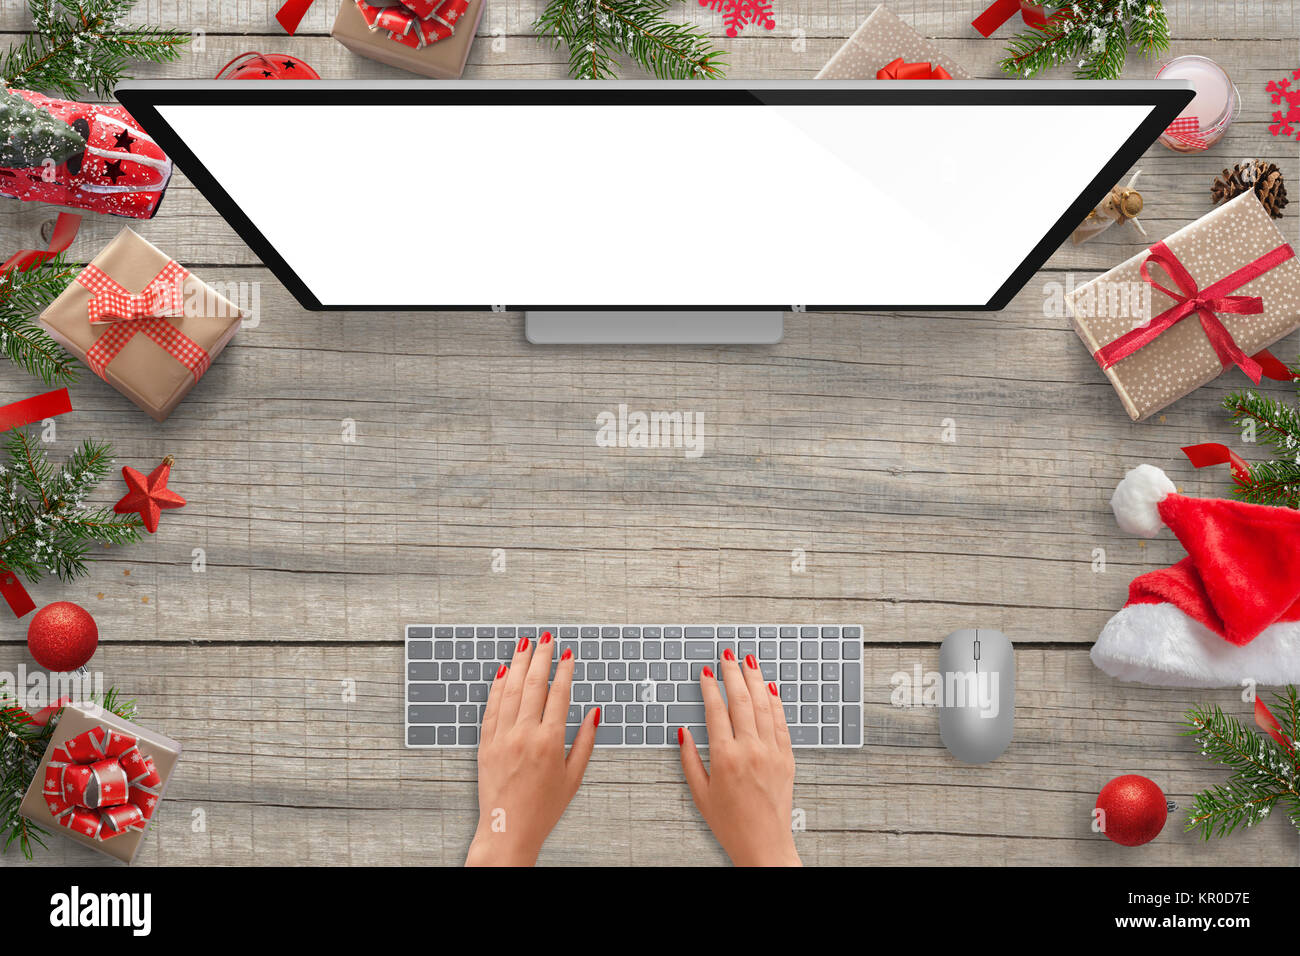 Work on computer with isolated screen for mockup presentation. Christmas scene with decorations. Woman typing on keyboard. Top view. Stock Photo